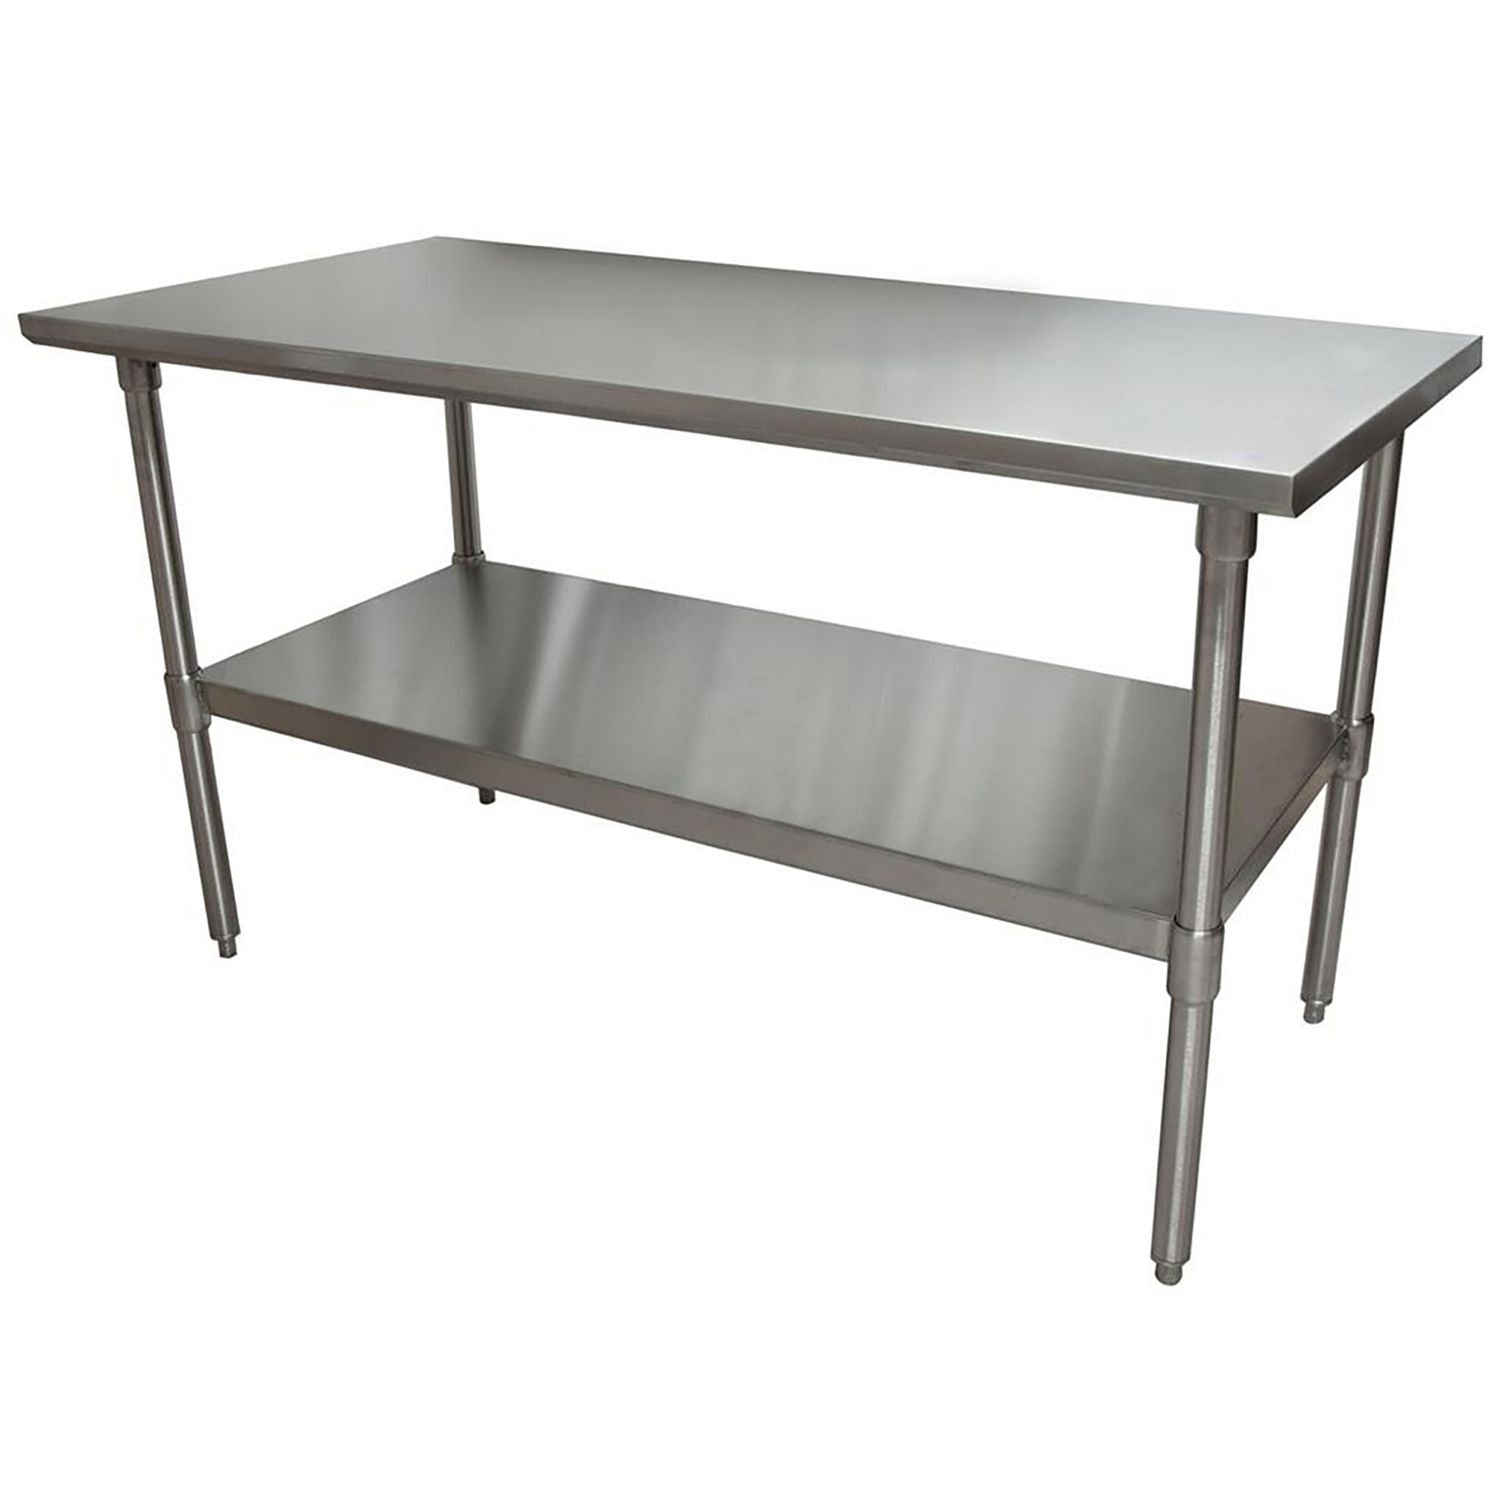 stainless-steel-flat-top-work-tables-60w-x-30d-x-36h-silver-2-pallet-ships-in-4-6-business-days_bke2vt6030 - 8